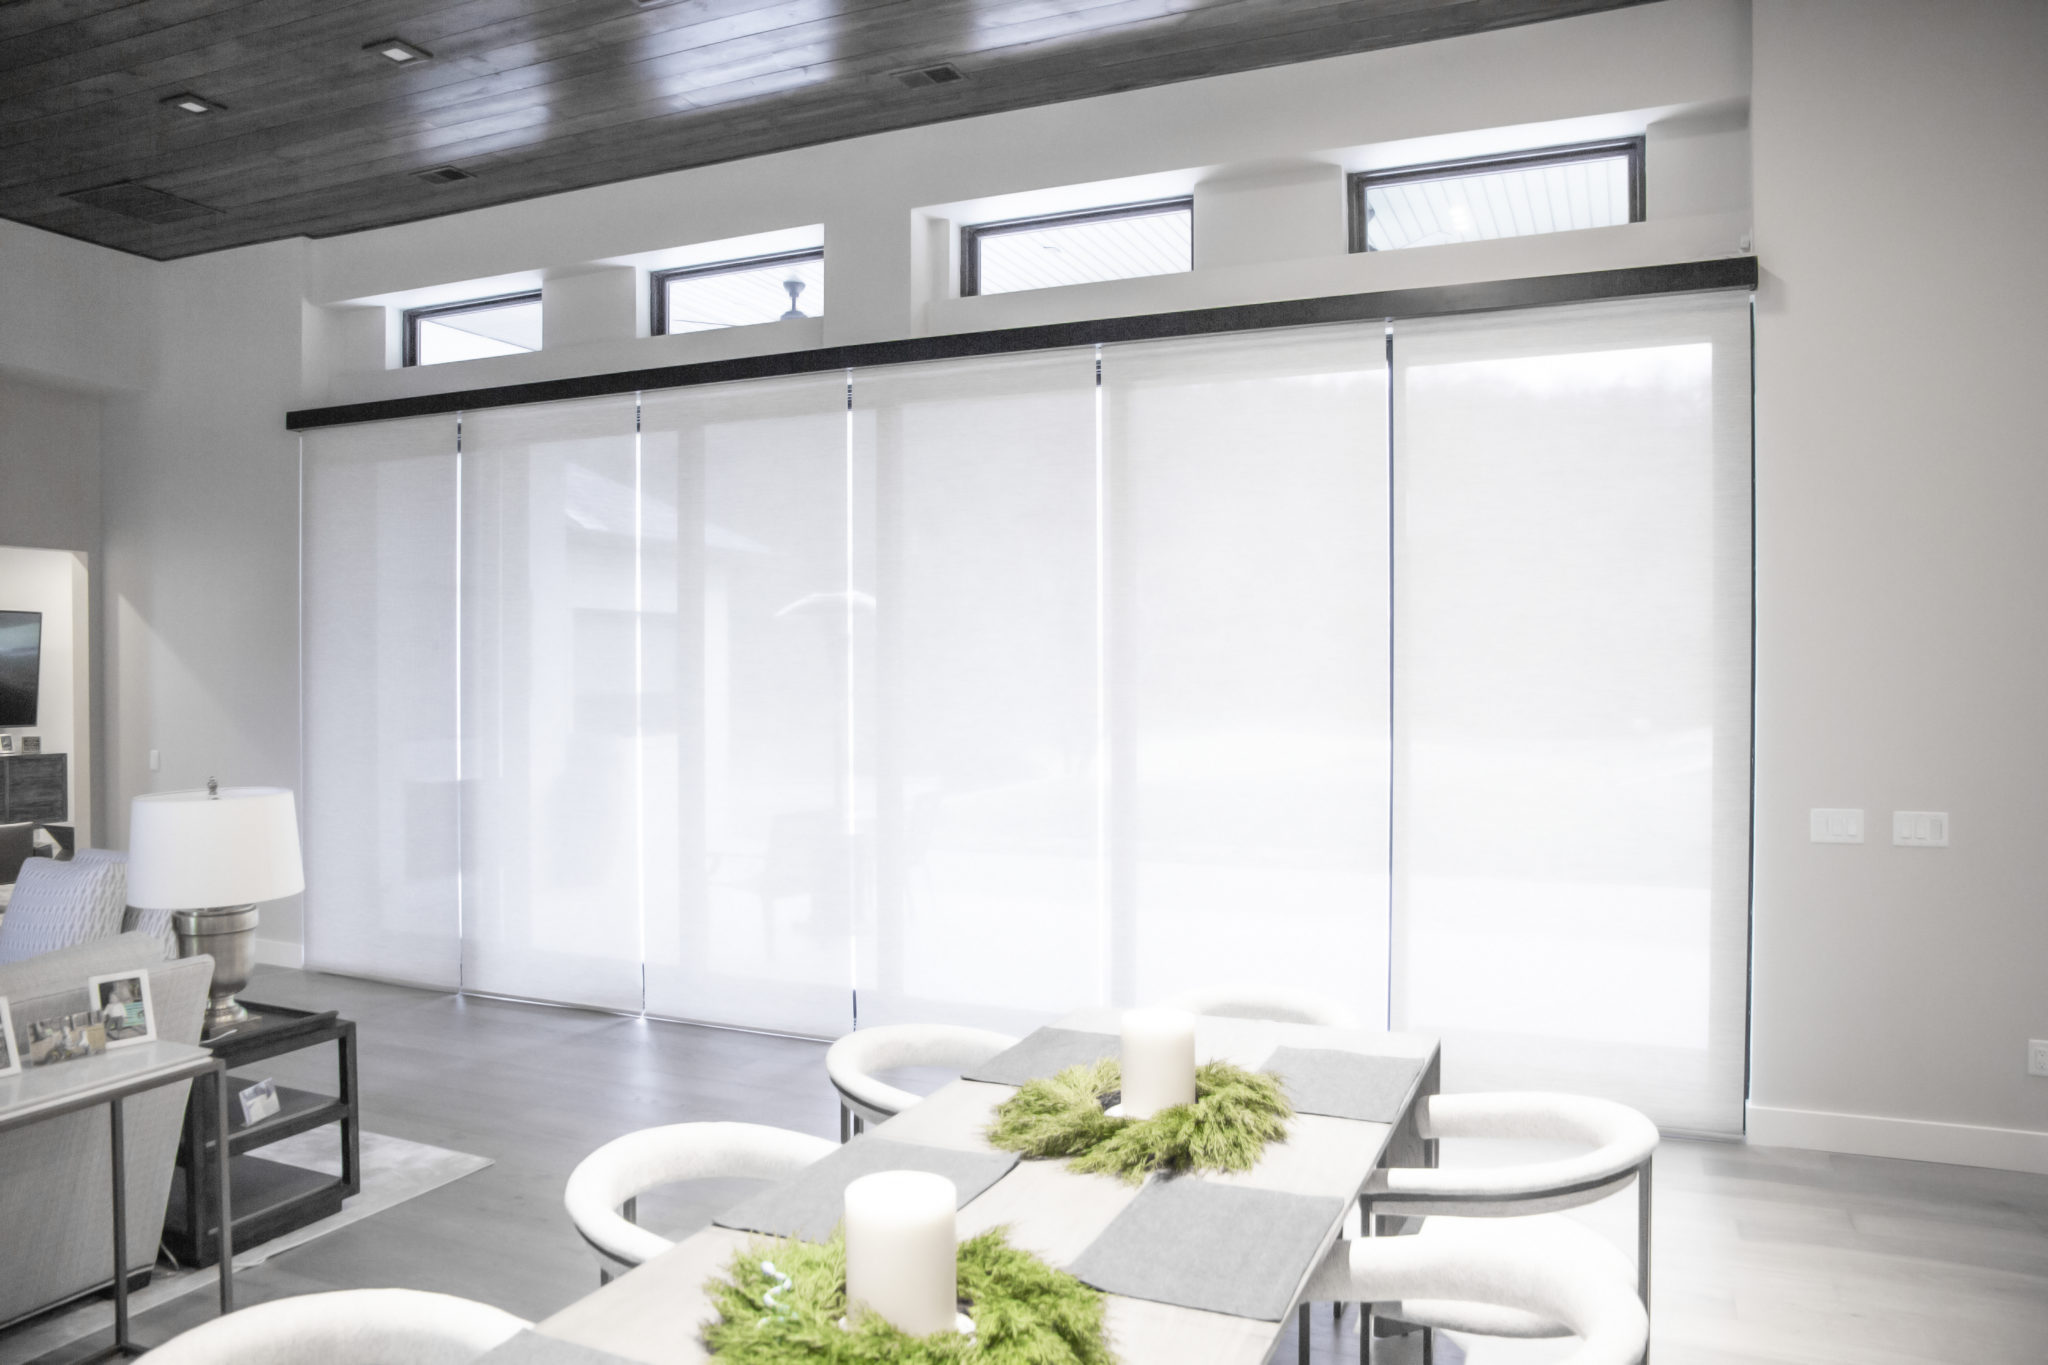 Review: PowerShades Motorized Roller Shade Systems